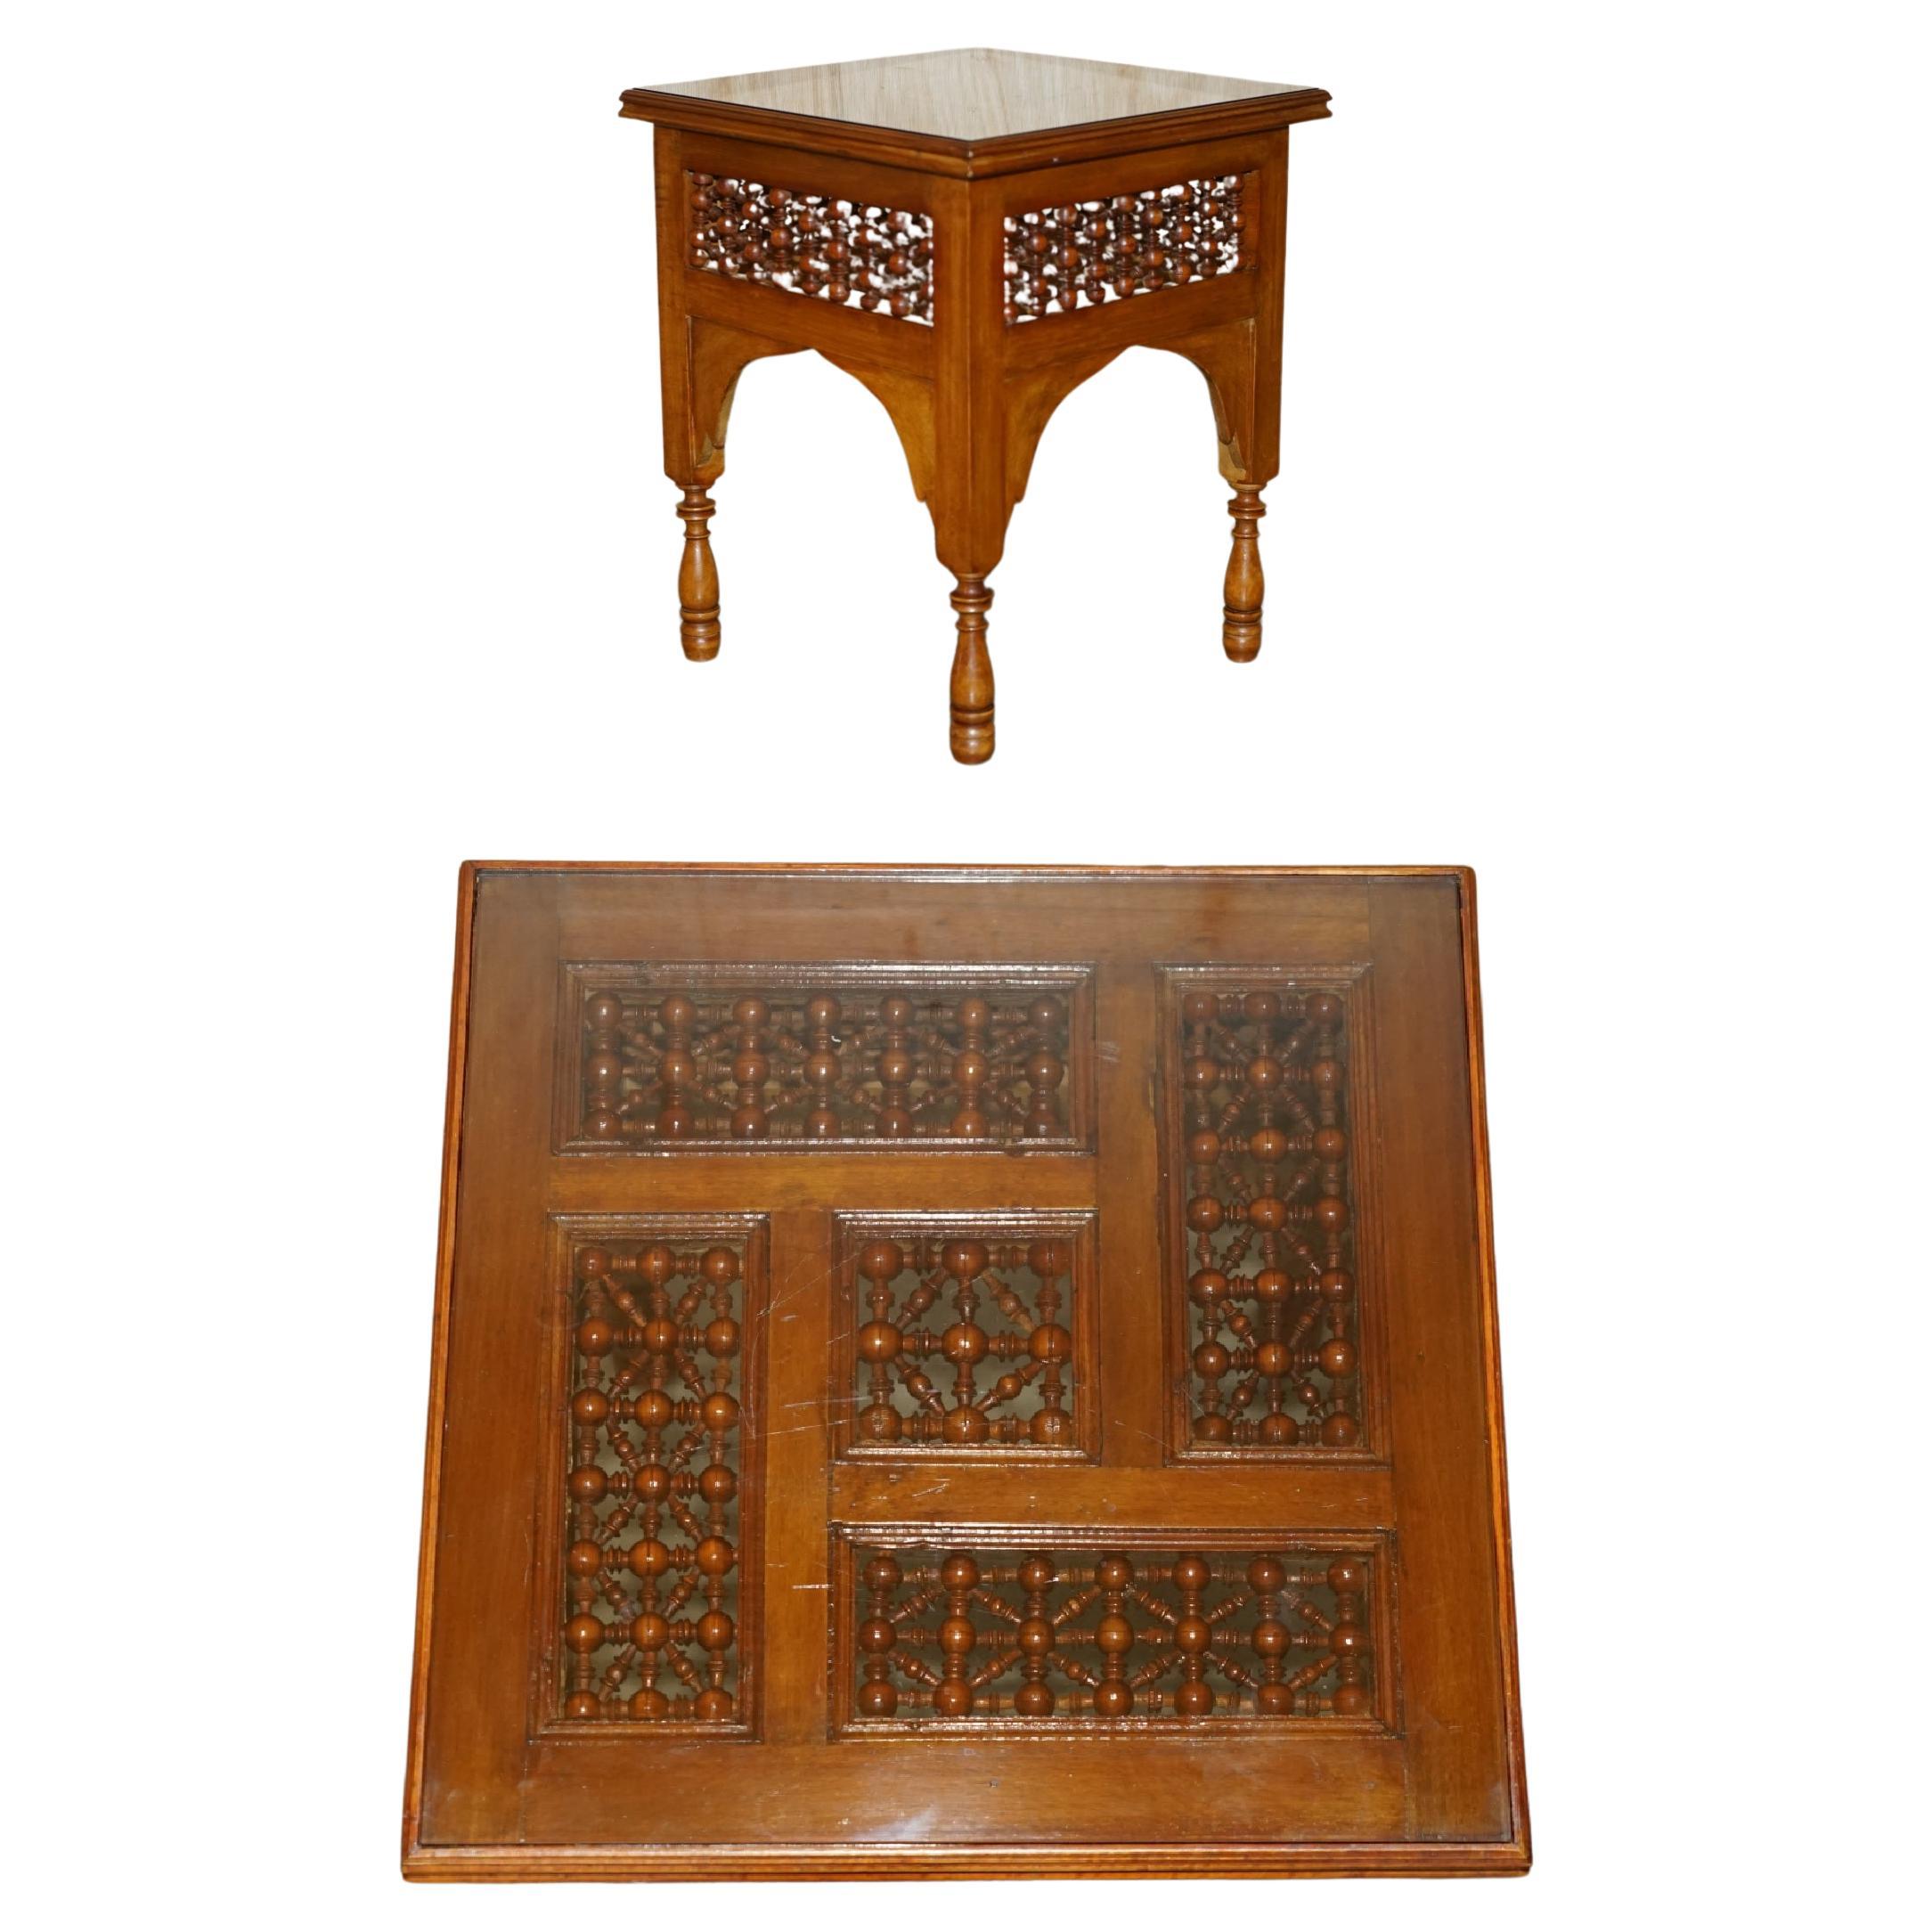 NICE 19TH CENTURY HAND CARVED LIBERTY'S LONDON MOORISH SiDE END LAMP WINE TABLe For Sale